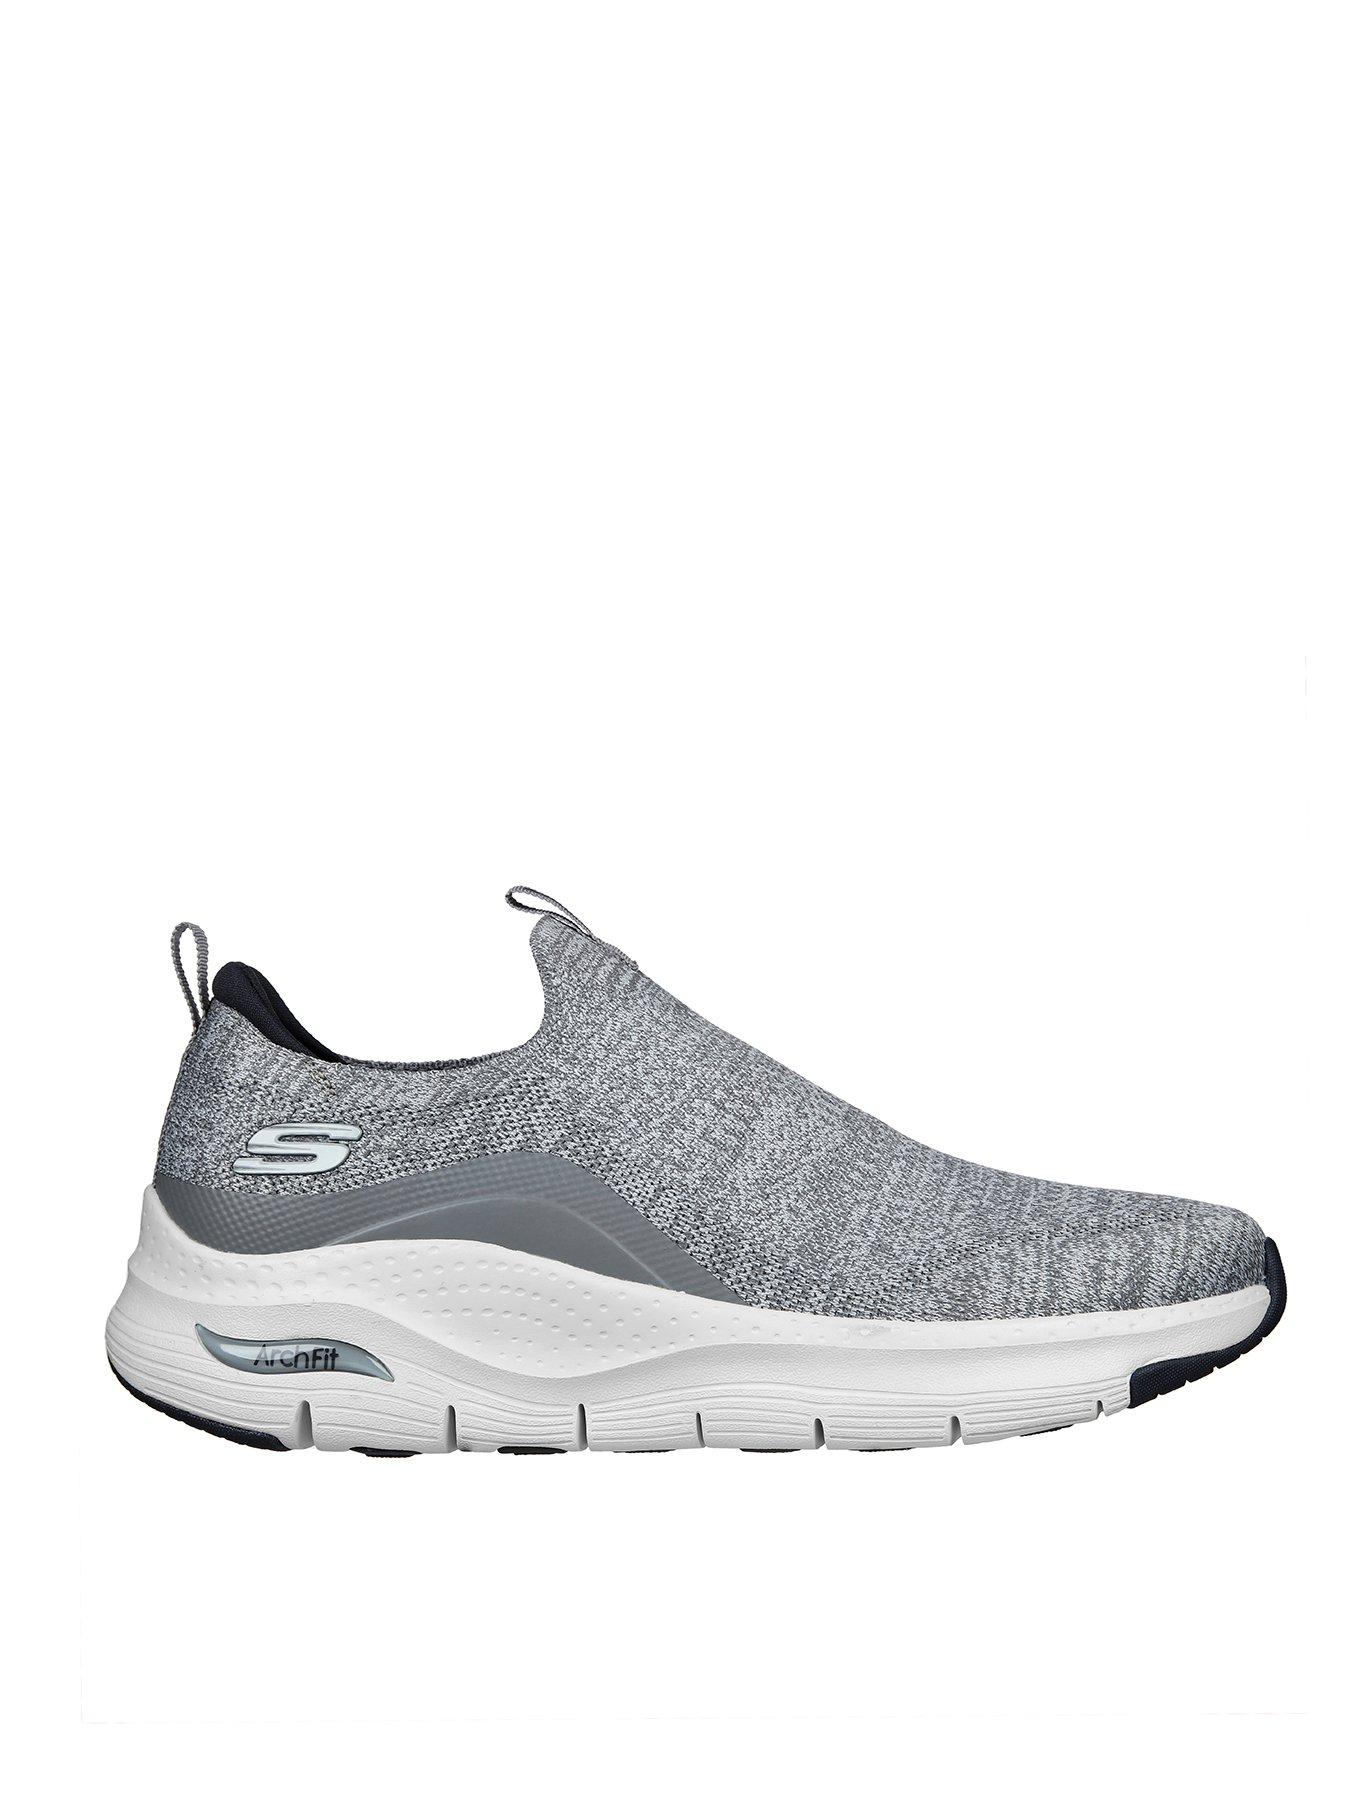 Skechers Arch Fit Ascension Arch Fit Knit Stretch Fit Slip-on Trainer ...